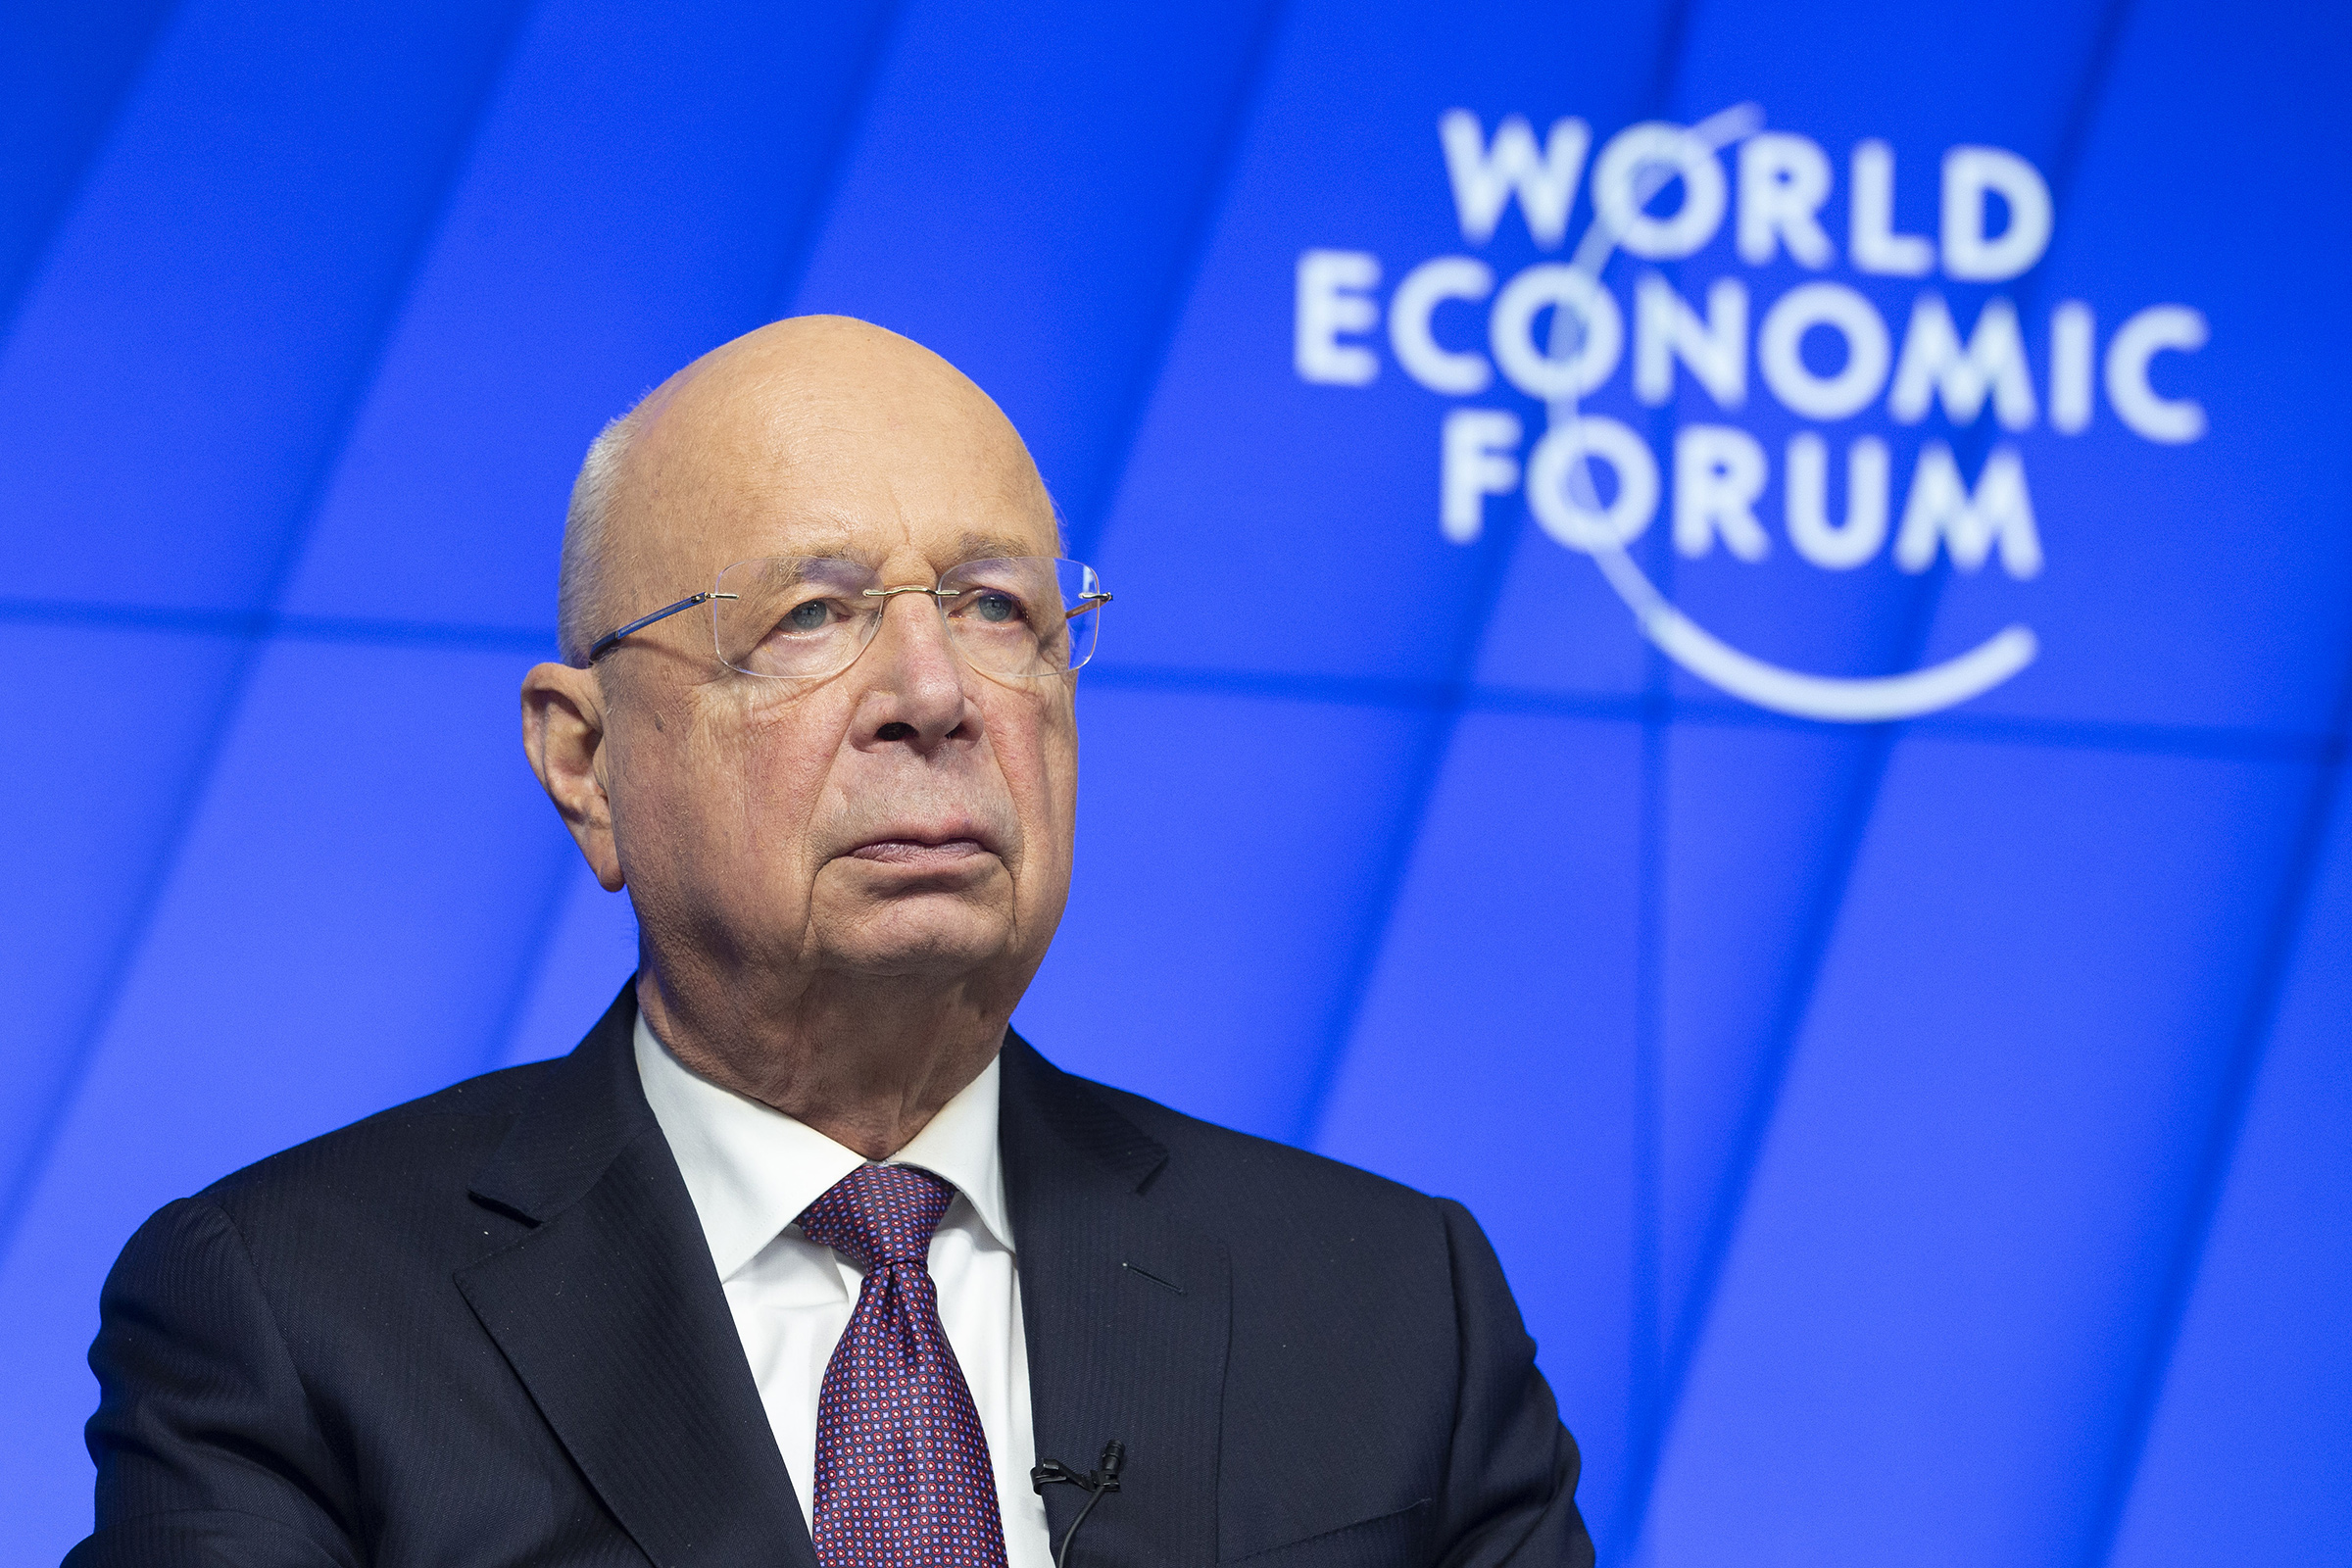 Klaus Schwab, Founder and Executive Chairman of the World Economic Forum, at the Davos Agenda, Switzerland, in January 2021